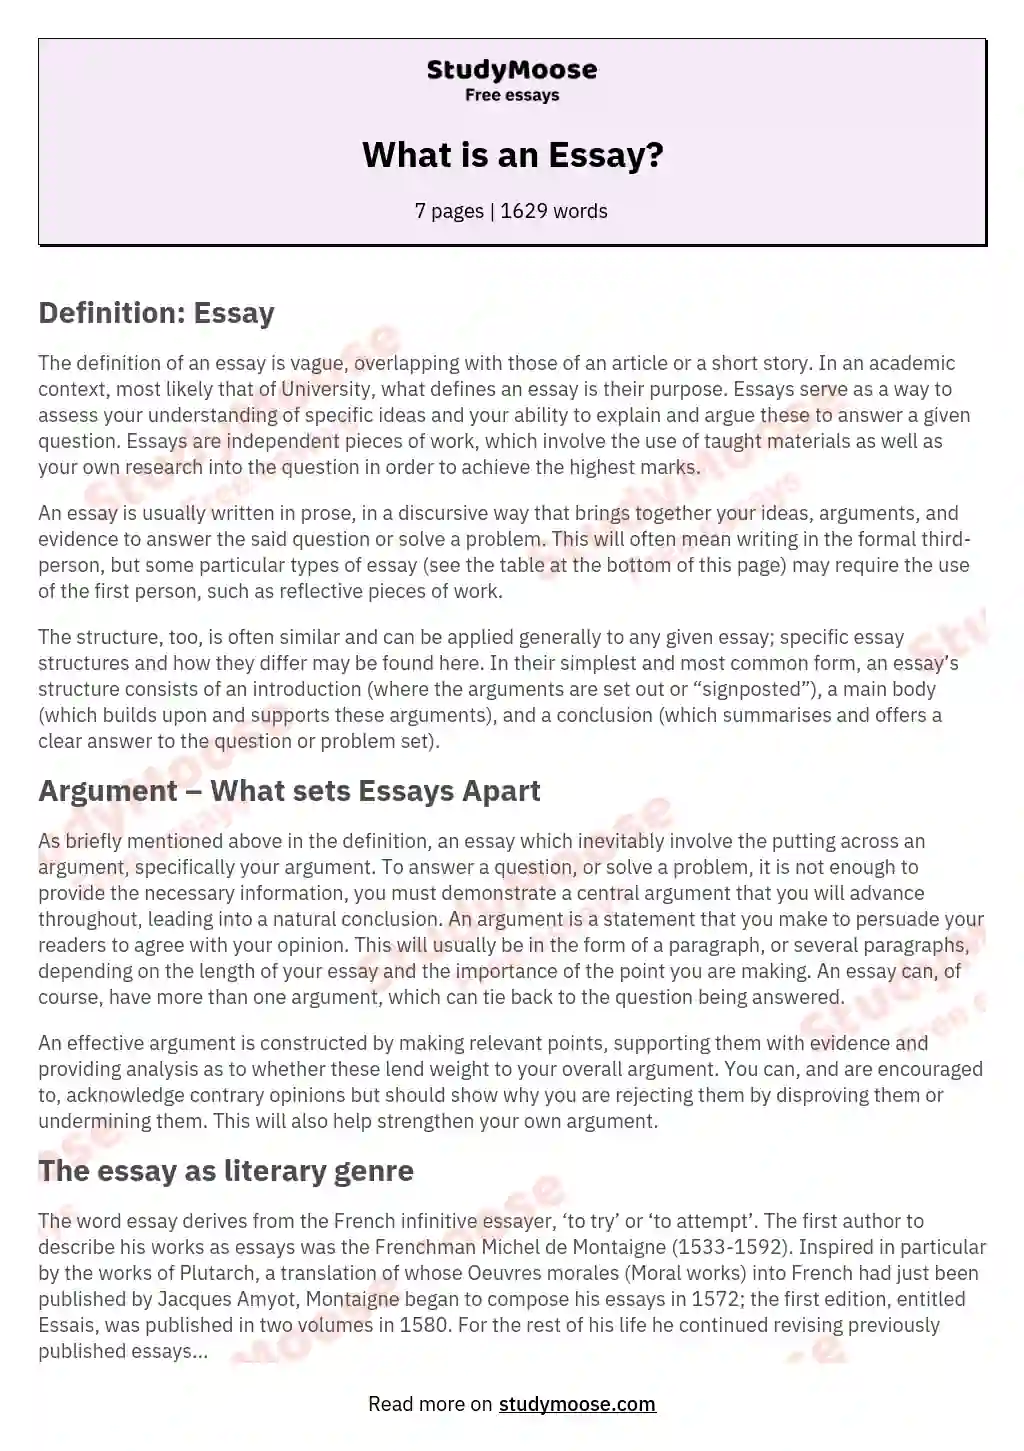 What is an Essay? essay